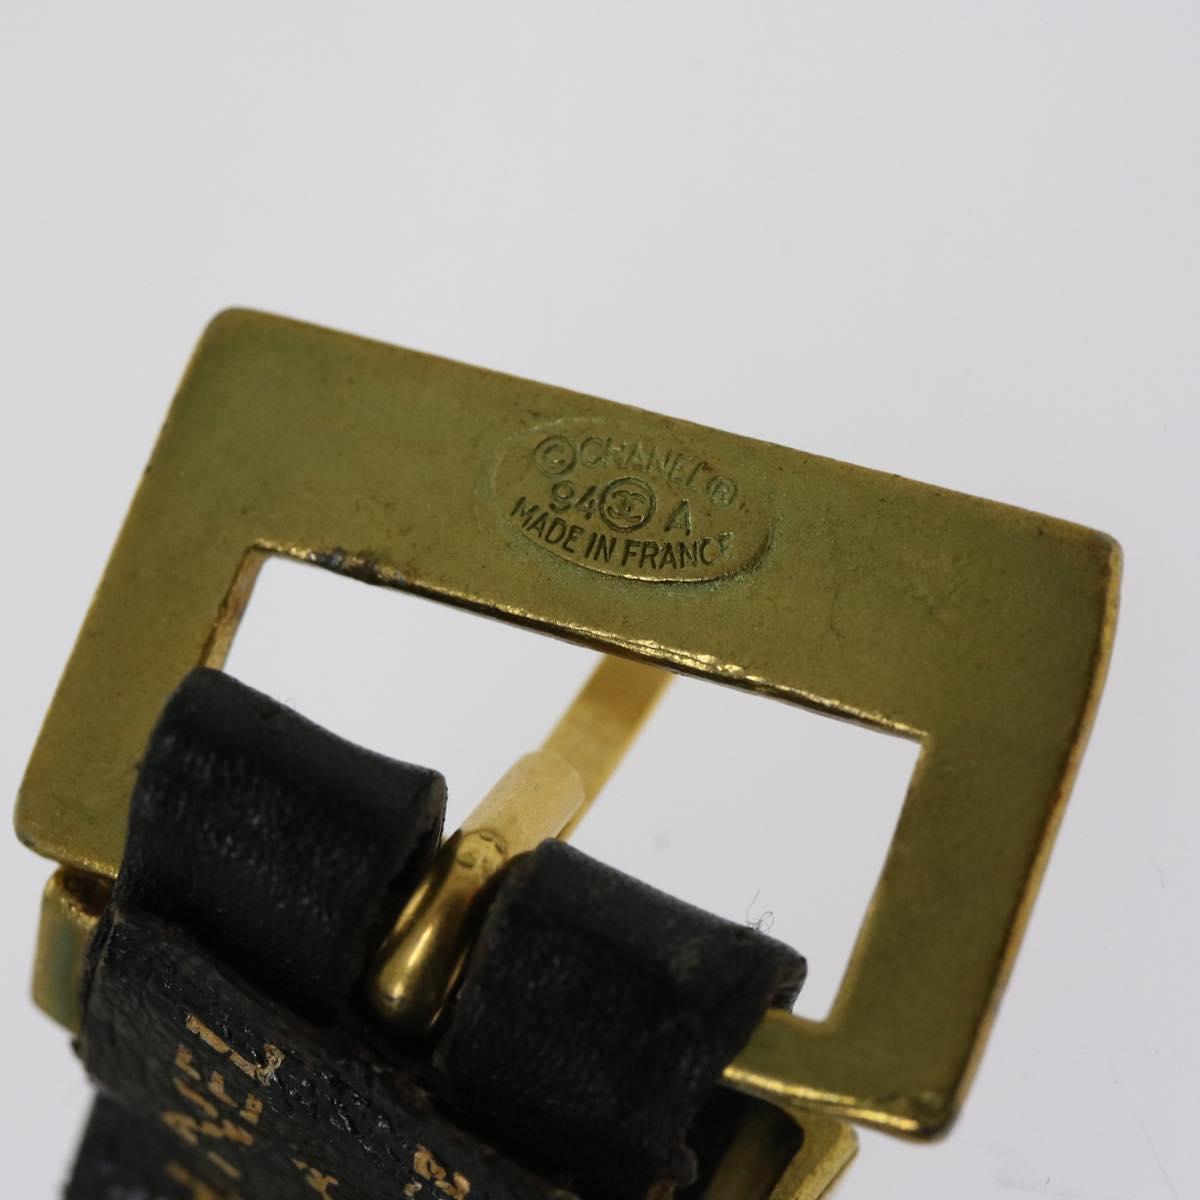 CHANEL Belt Leather 25.6""-27.6"" Gold Tone Black CC Auth bs11333